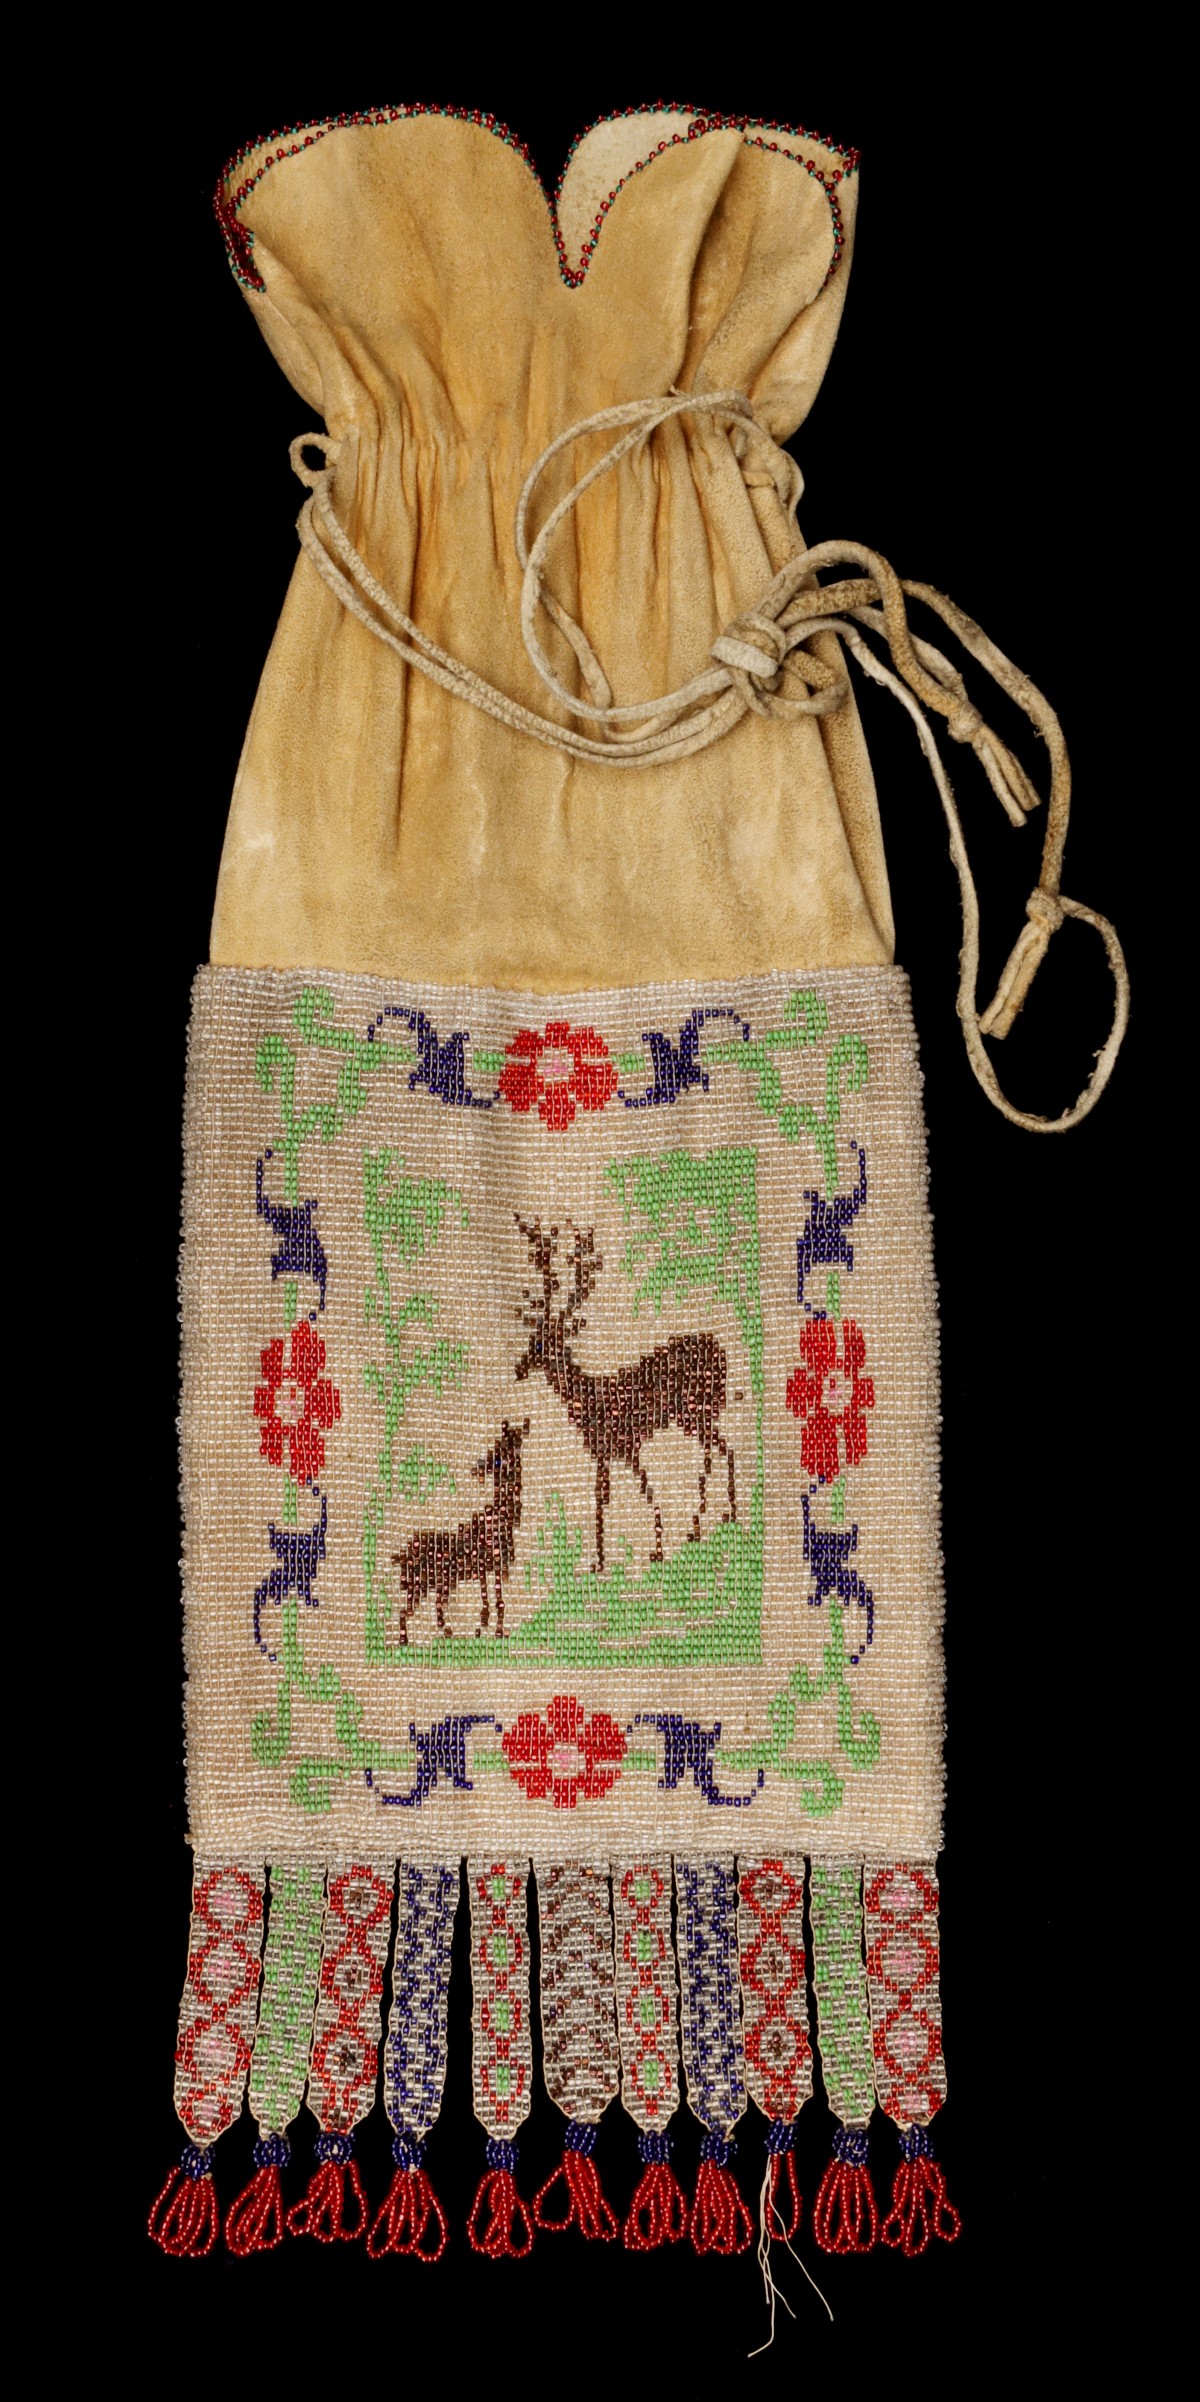 A GREAT LAKES BEADED HIDE PIPE BAG WITH ELK